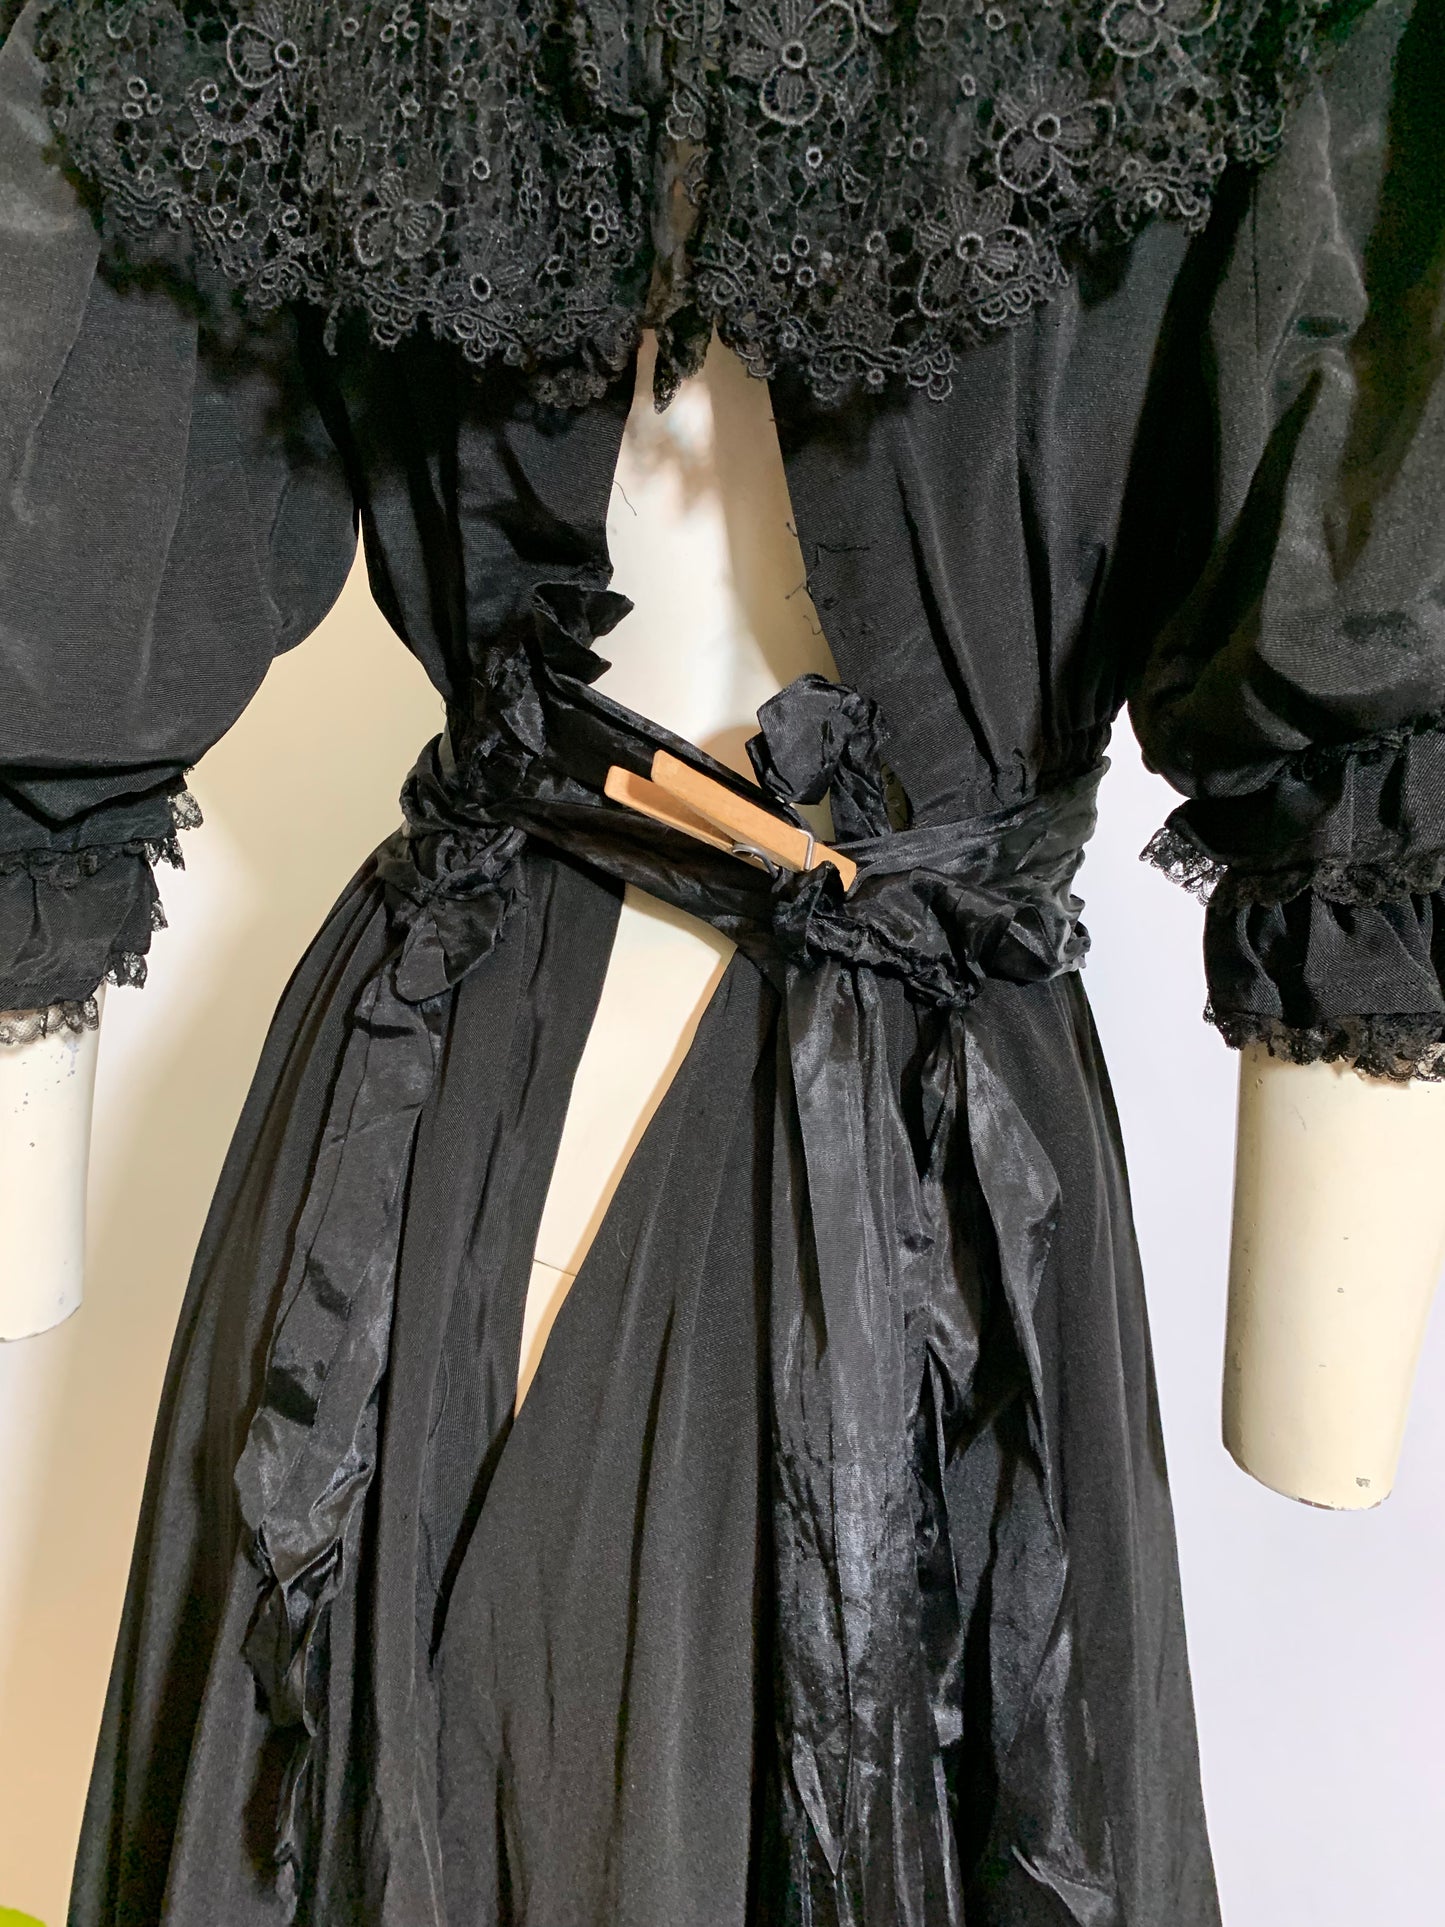 Black Faille Lace and Bow Trimmed Two Piece Mourning Dress and Hat circa 1910s